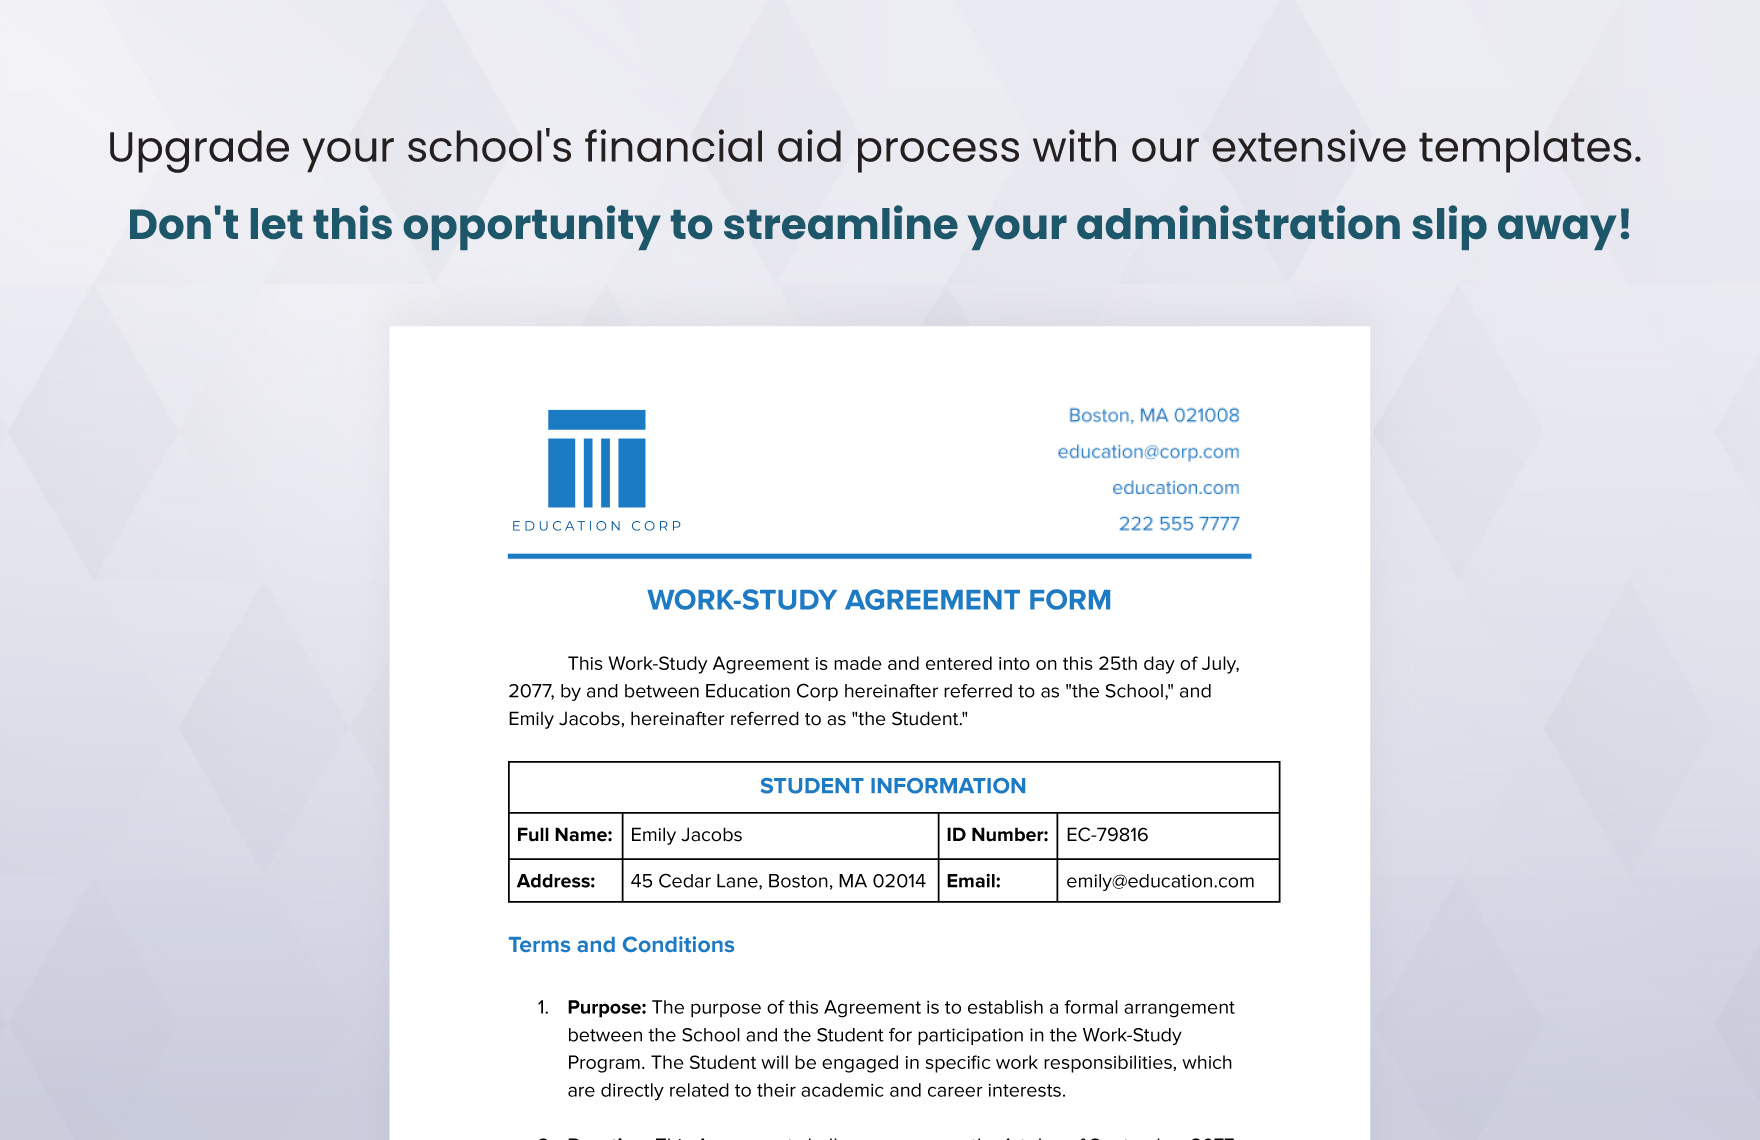 Work-Study Agreement Form Template